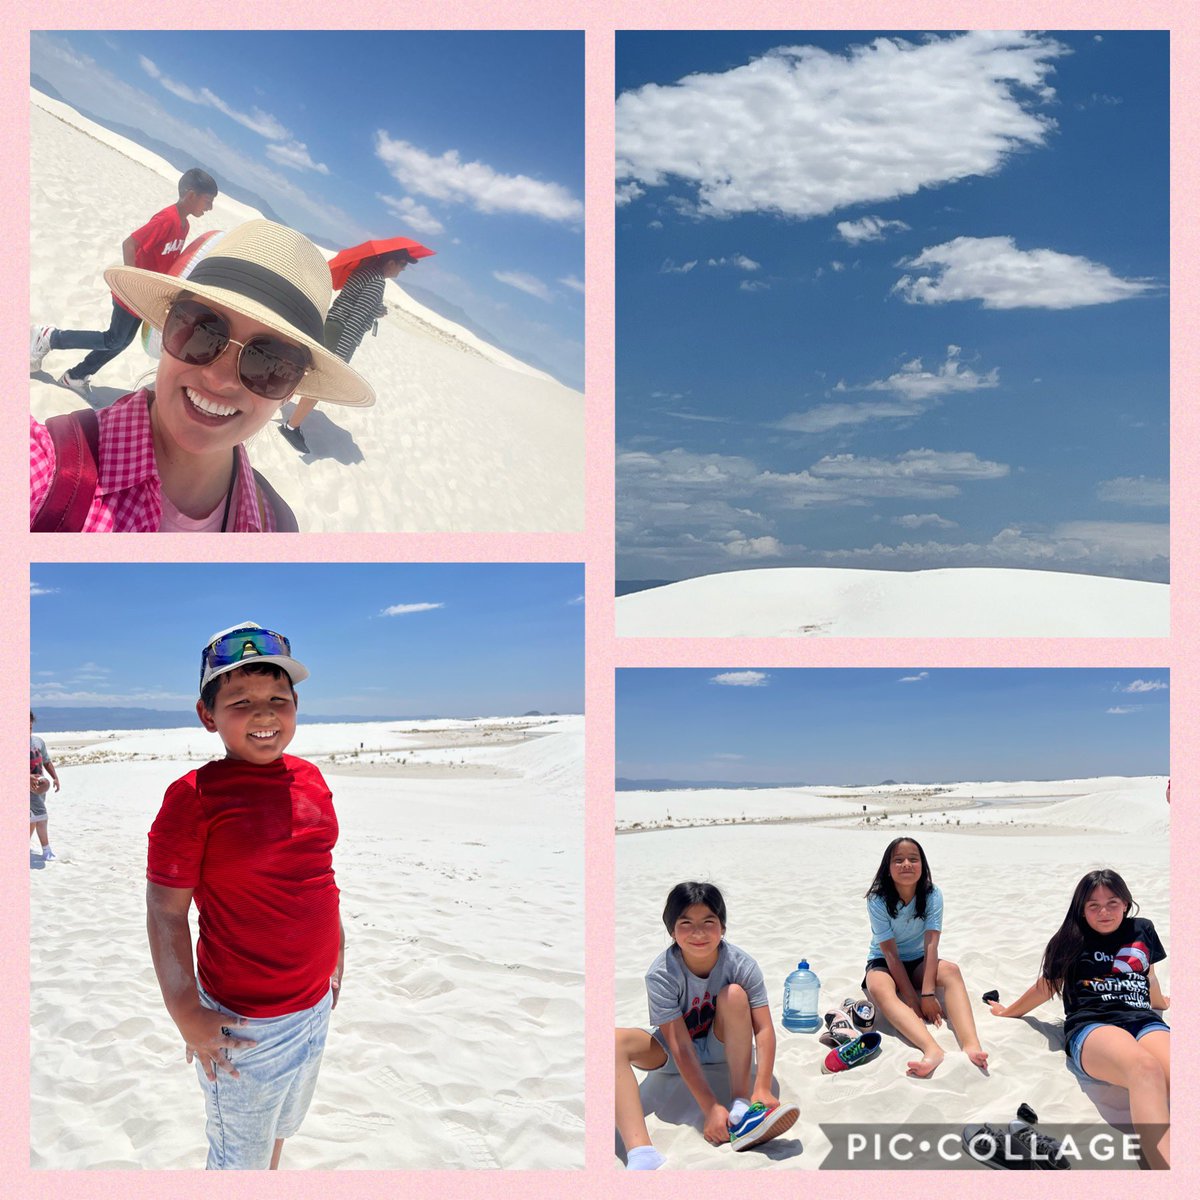 It was a quick trip to White Sands but glad we were able to give our Coyotes this experience. Grateful to my amazing team for being such great sports. ❤️#TISDProud